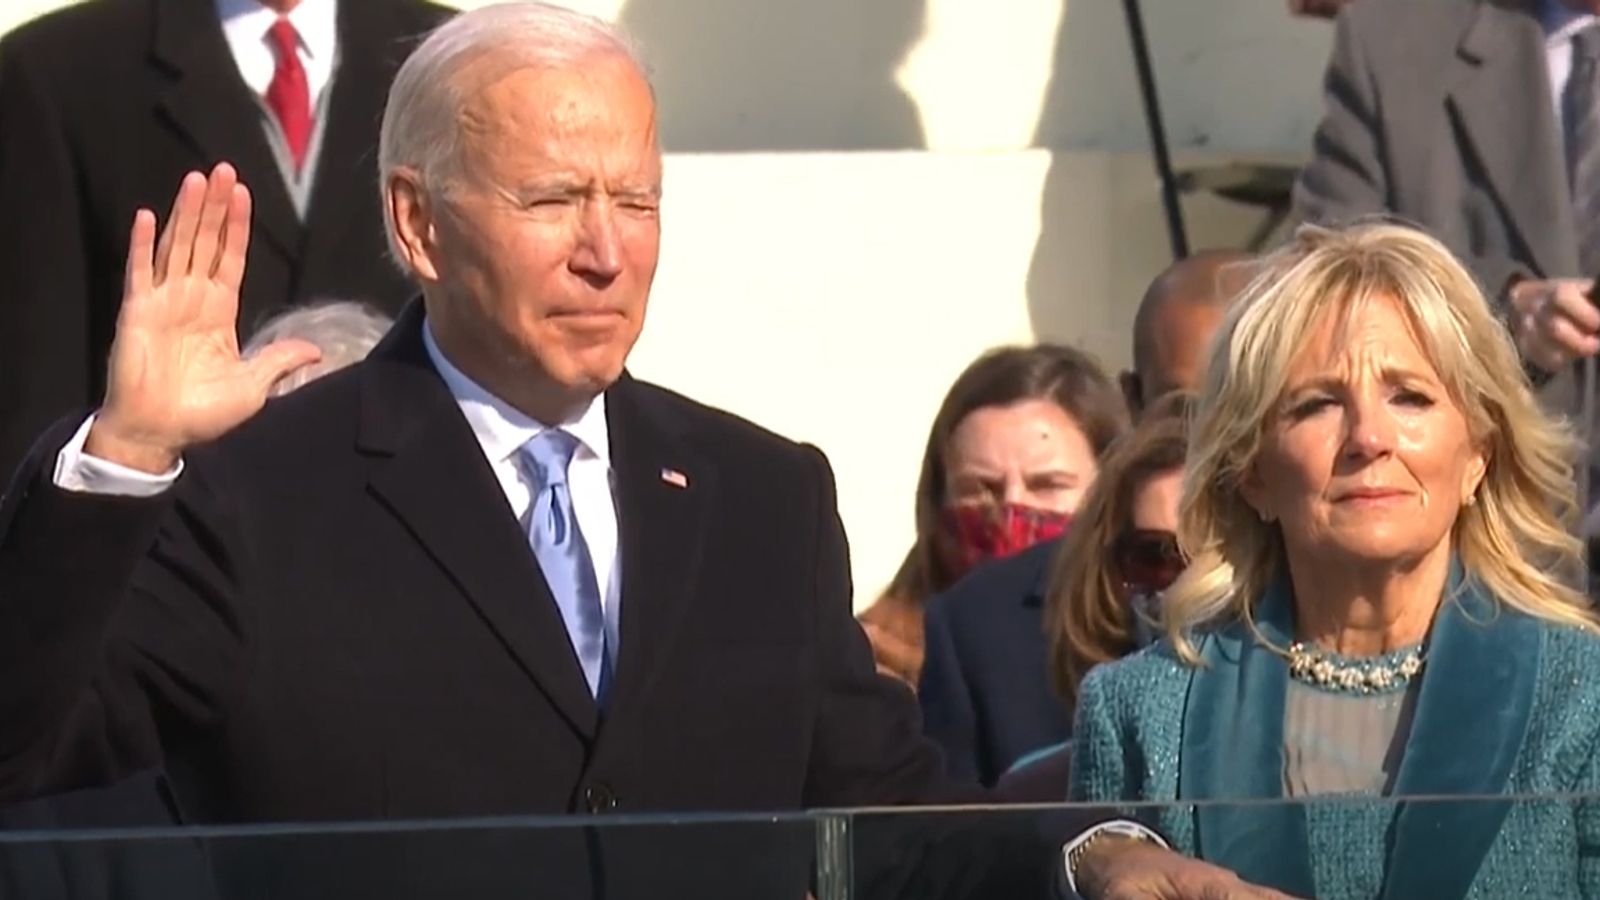 Biden sworn in as 46th US President, stresses need for unity, healing in inaugural address